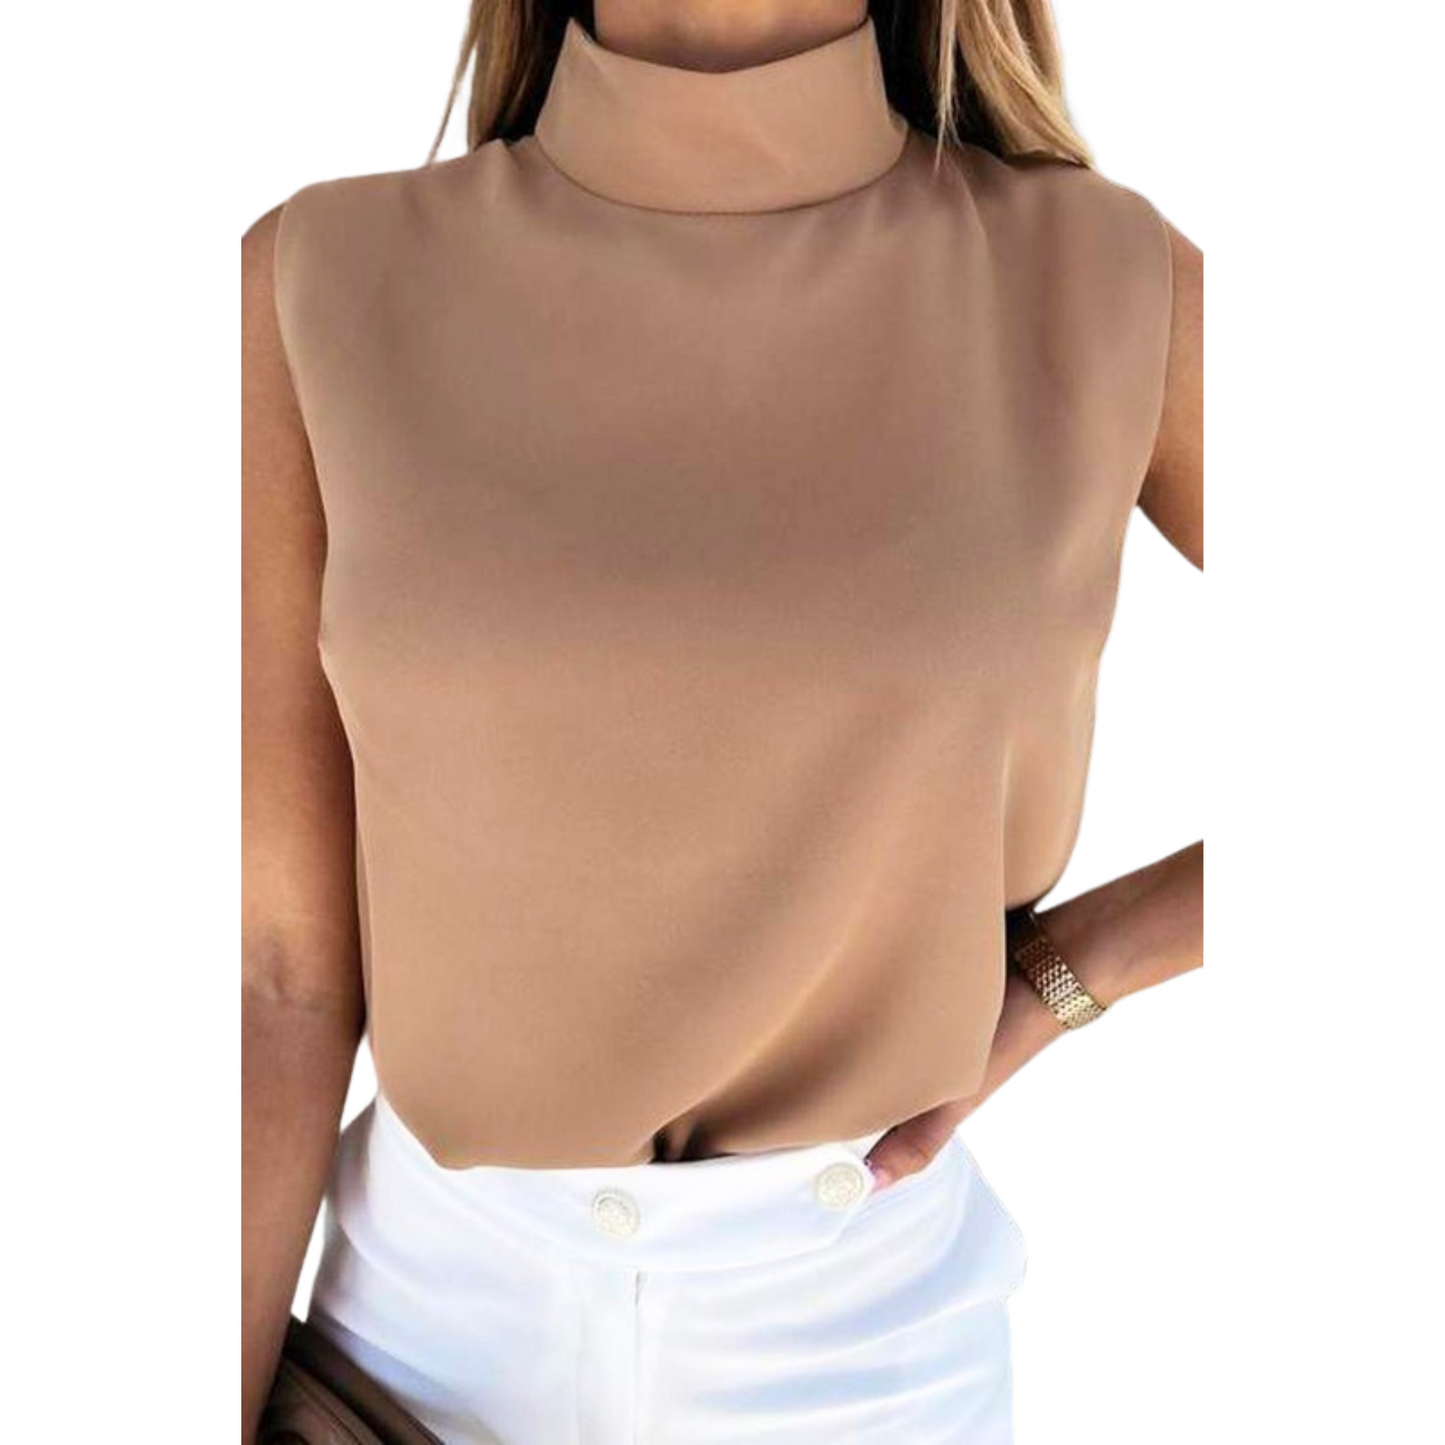 This Mock Neck Sleeveless Top is an essential wardrobe staple. Crafted in a classic tan color, it can be easily styled with any outfit to bring an elegant touch. With its timeless design, it will add sophistication to your look.